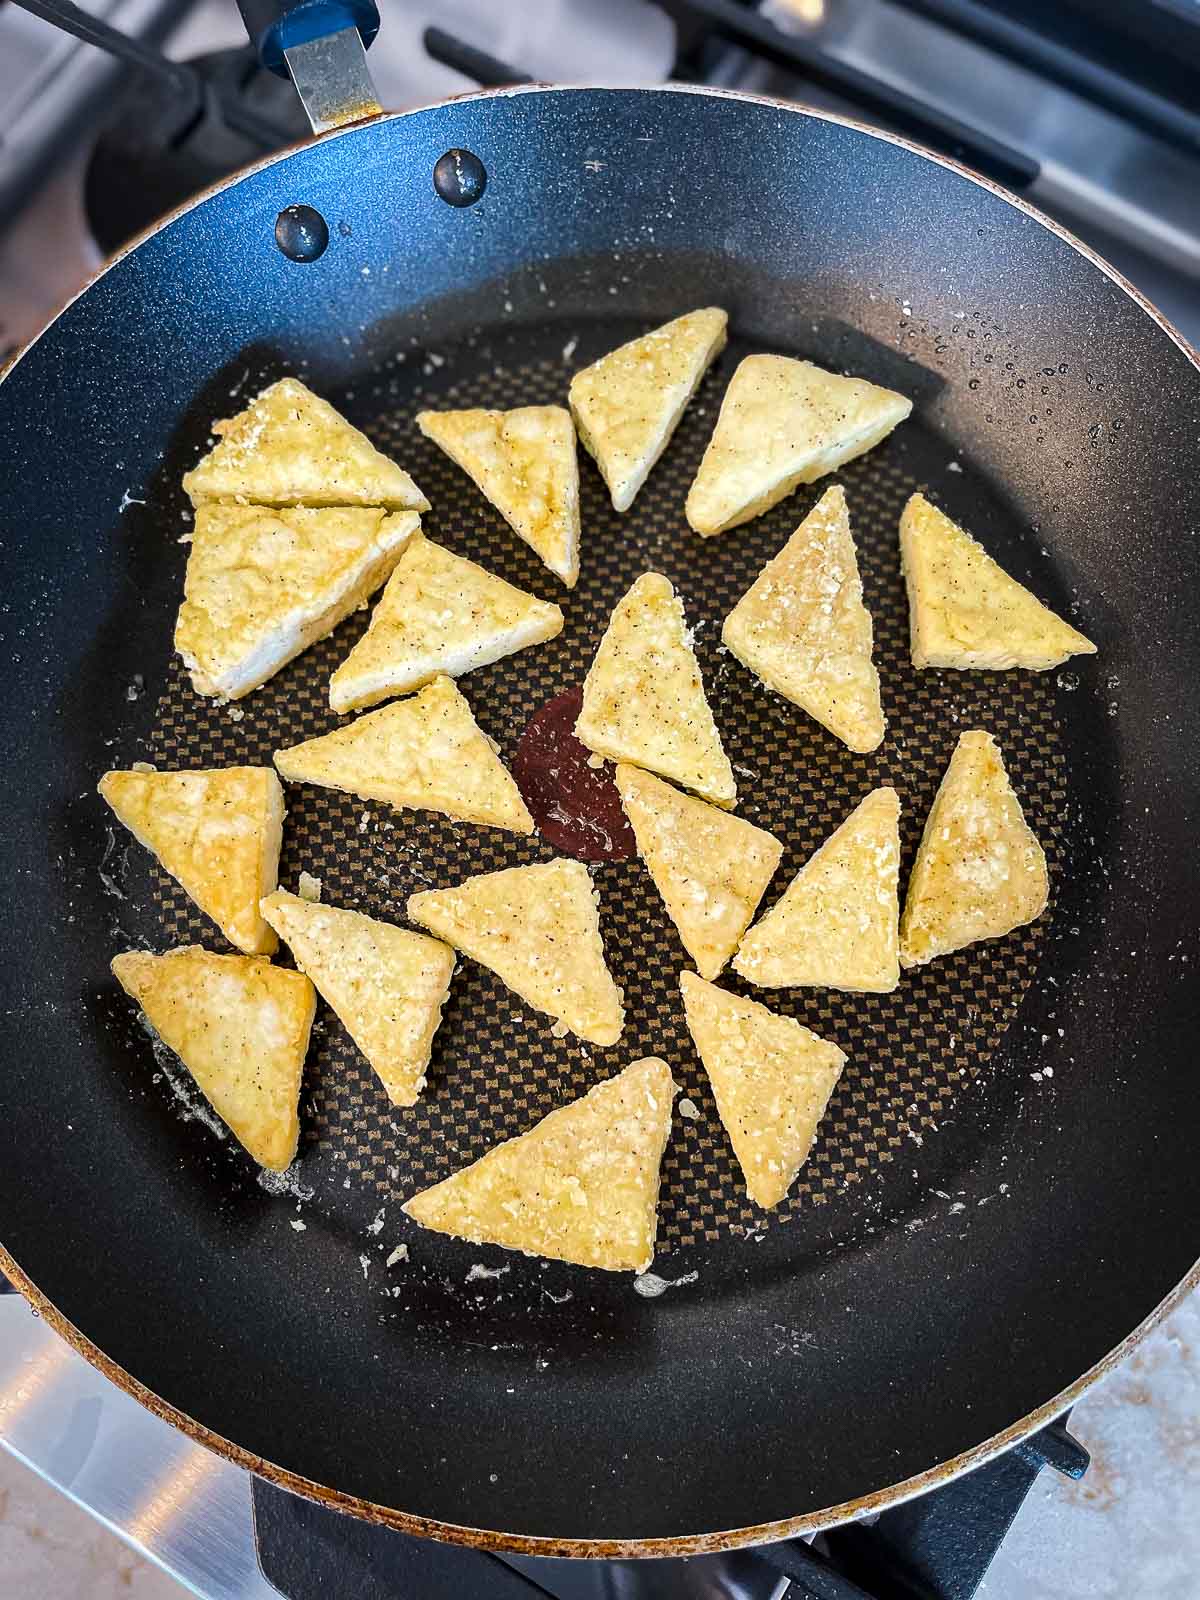 Tofu triangles crisping in a frying pan.